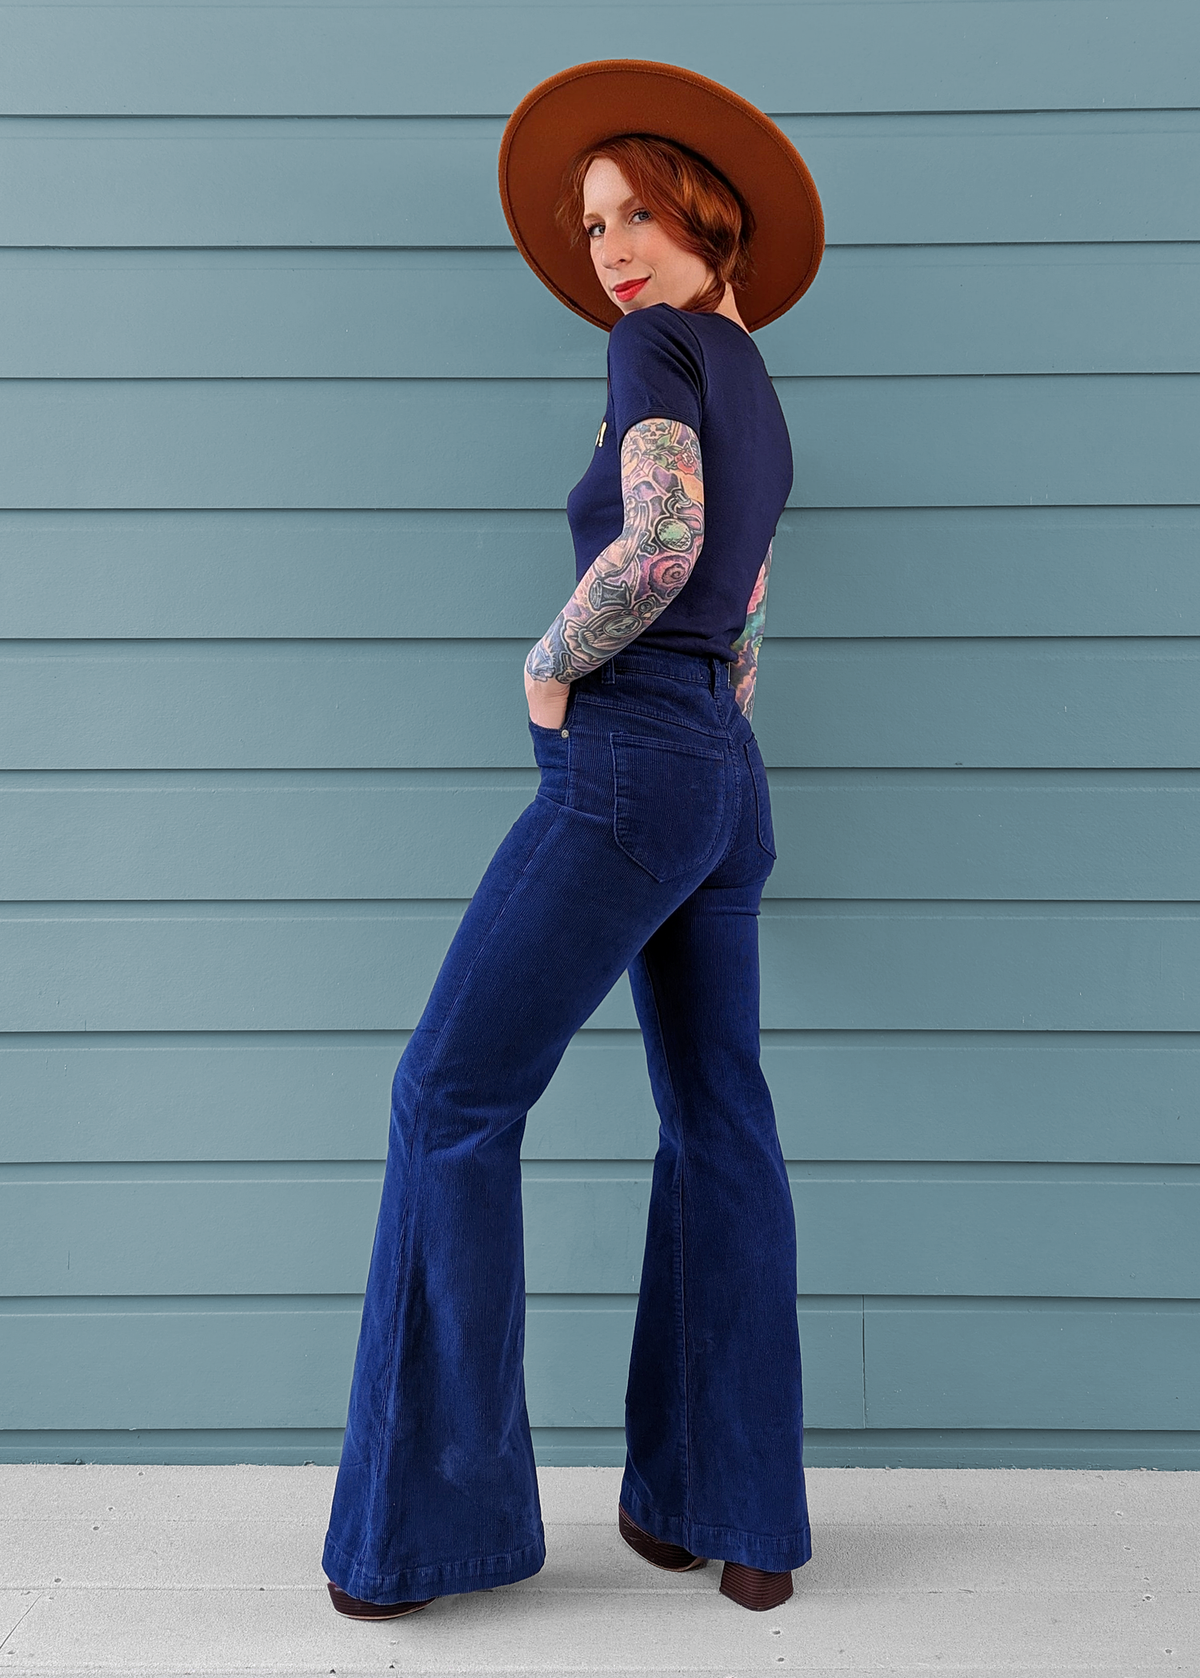 Rolla's Jeans Marine Blue Corduroy Eastcoast Flare: 70s inspired bell bottoms with a high rise waist, velvety soft thin wale corduroy, and a flare leg.